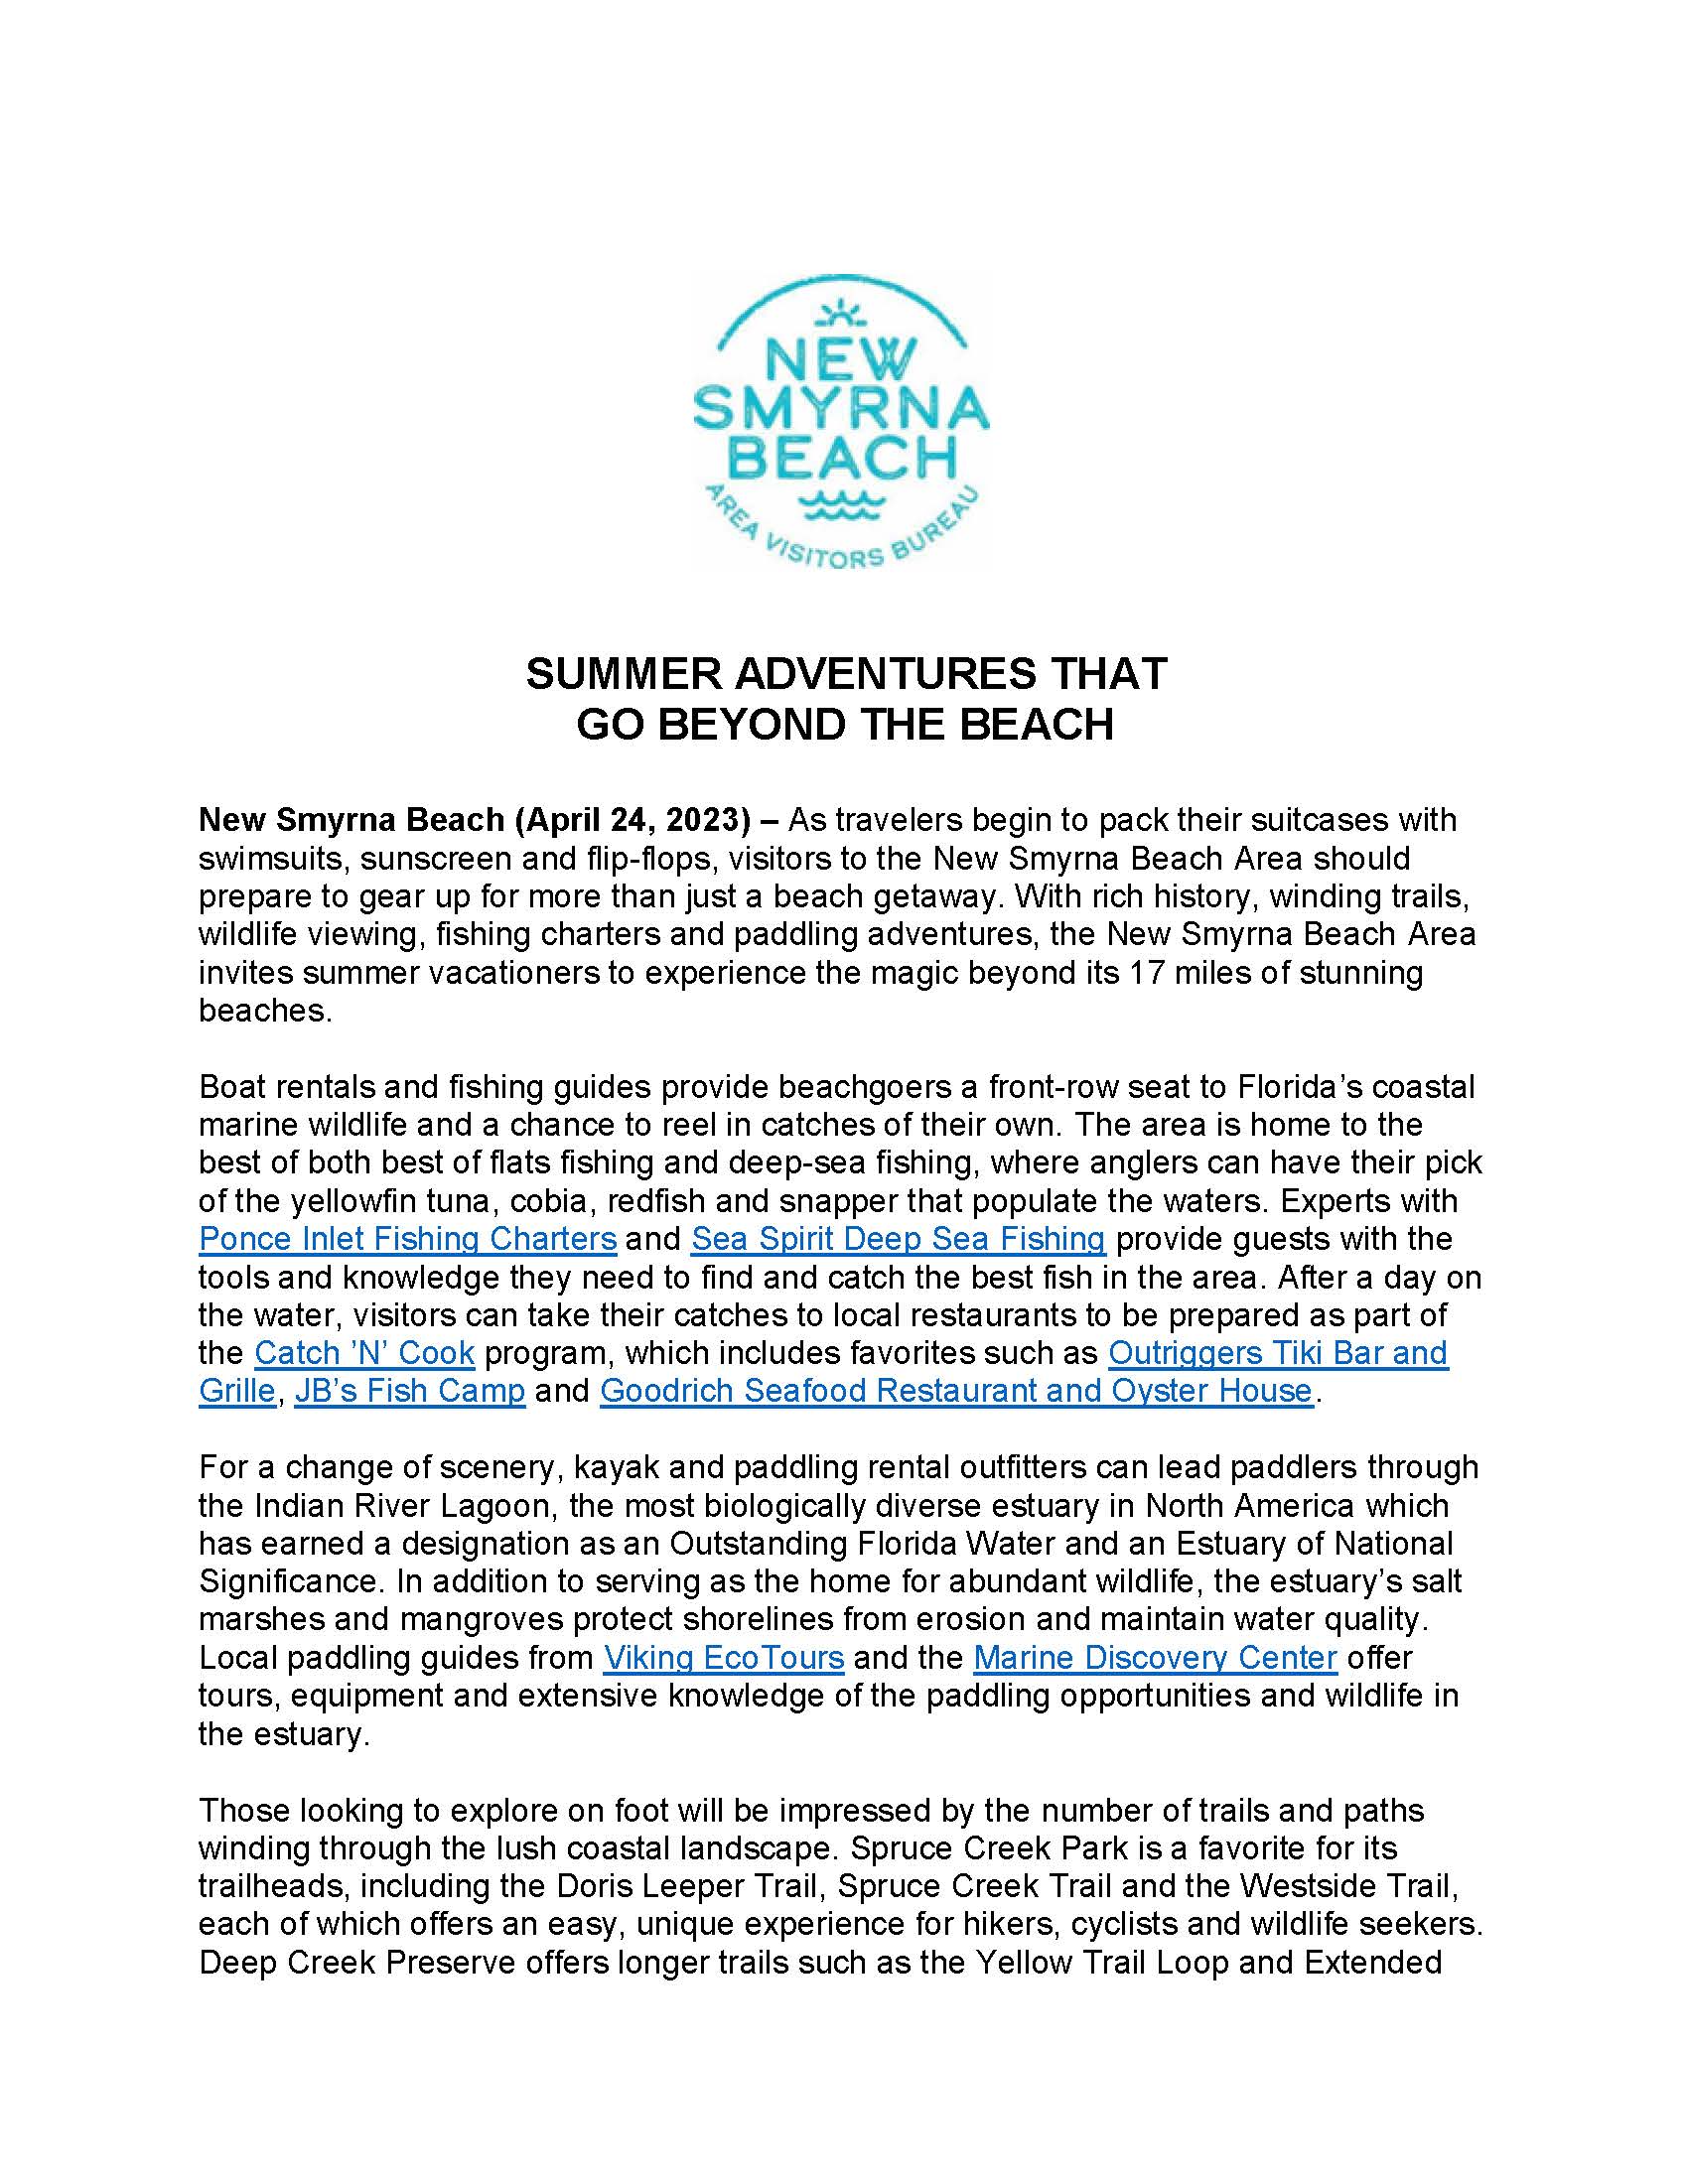 Press Release - Go Beyond the Beach this Summer_Page_1